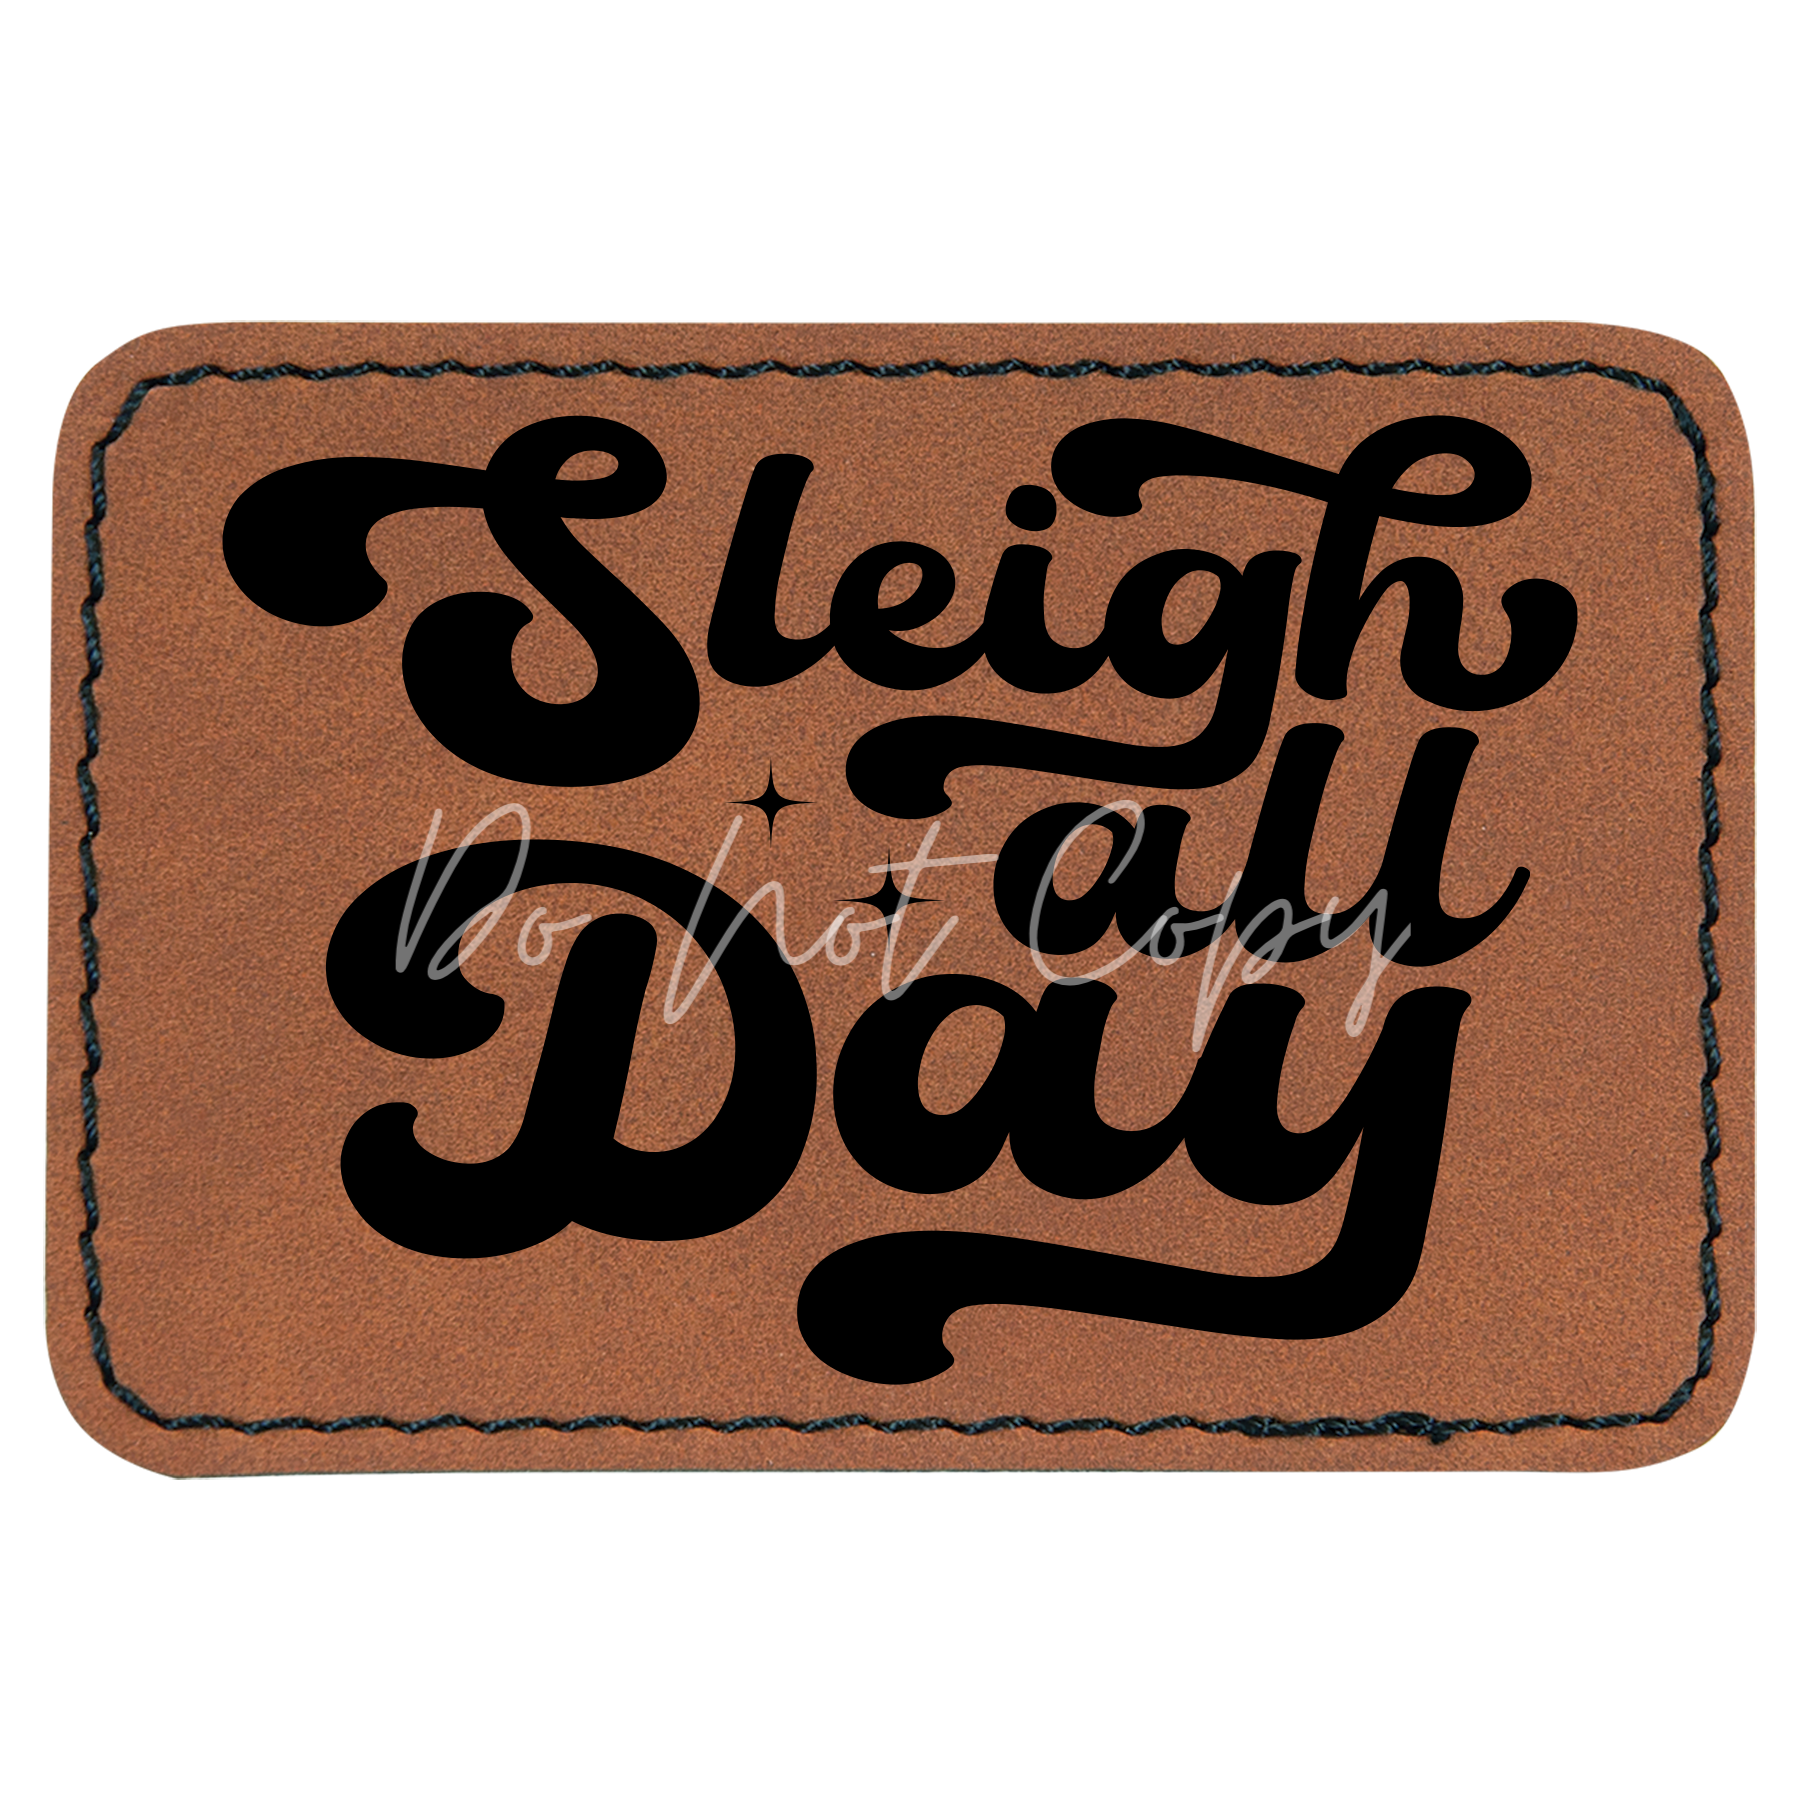 Sleigh All Day Patch